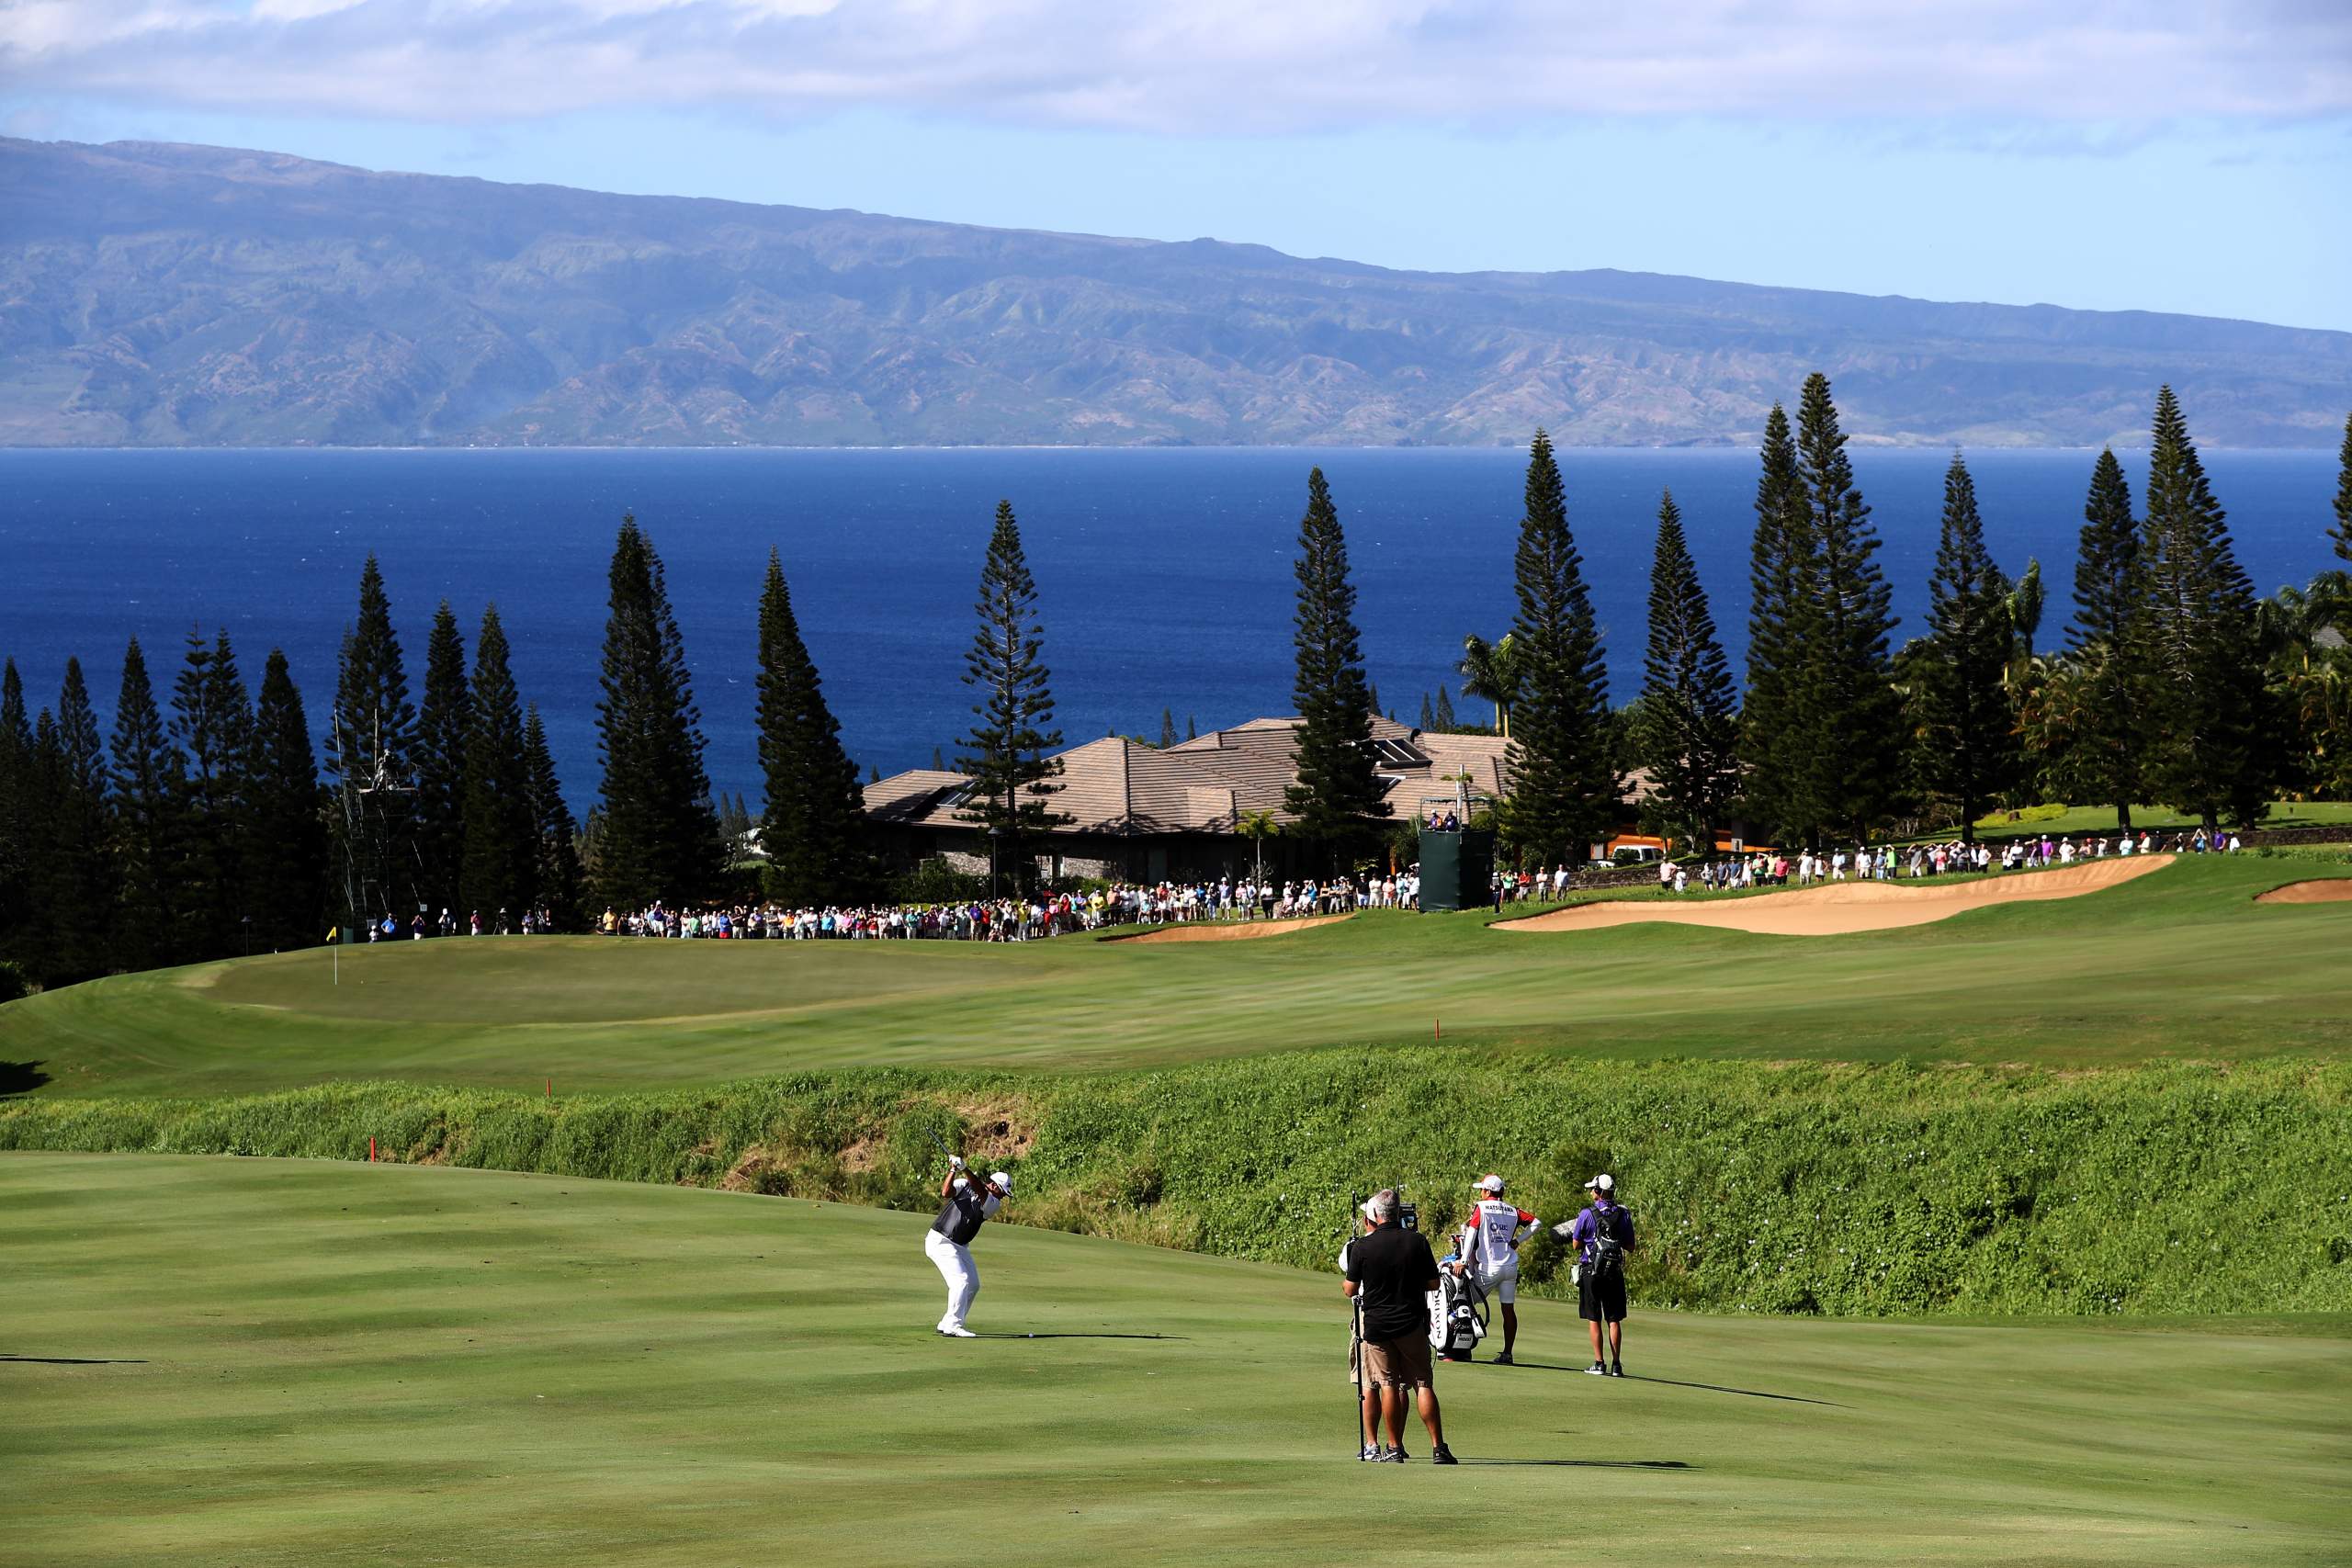 <em><b>Course Location: Lahaina, Hawaii</b></em> Conceived by the esteemed visionaries Ben Crenshaw and Bill Coore, this remarkable course was meticulously crafted to complement its breathtaking setting amidst the undulating slopes of the West Maui Mountains. With sweeping ocean panoramas gracing virtually every hole, the course unfolds as a captivating tapestry of natural beauty and golfing prowess. Spanning an impressive 7,596 yards with a par of 73, it presents a formidable test for even the most seasoned professionals, yet its expansive fairways and inviting greens ensure an accessible and enjoyable experience for golfers of all abilities. As stated before, you really don't need to convince me to go to Hawaii to golf.